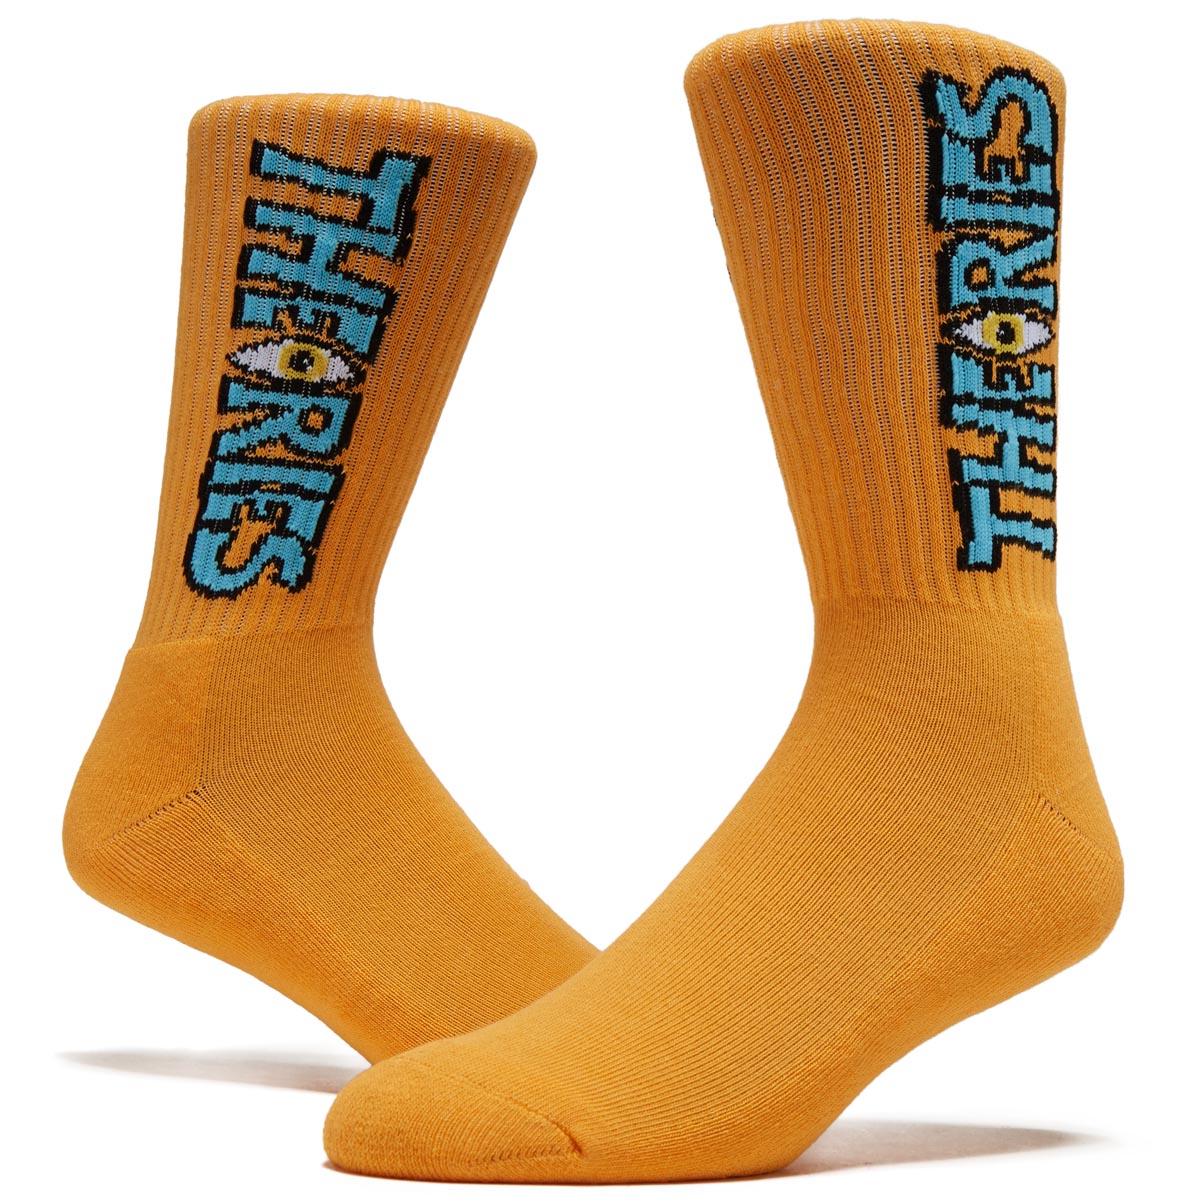 Theories That's Life Socks - Gold image 2